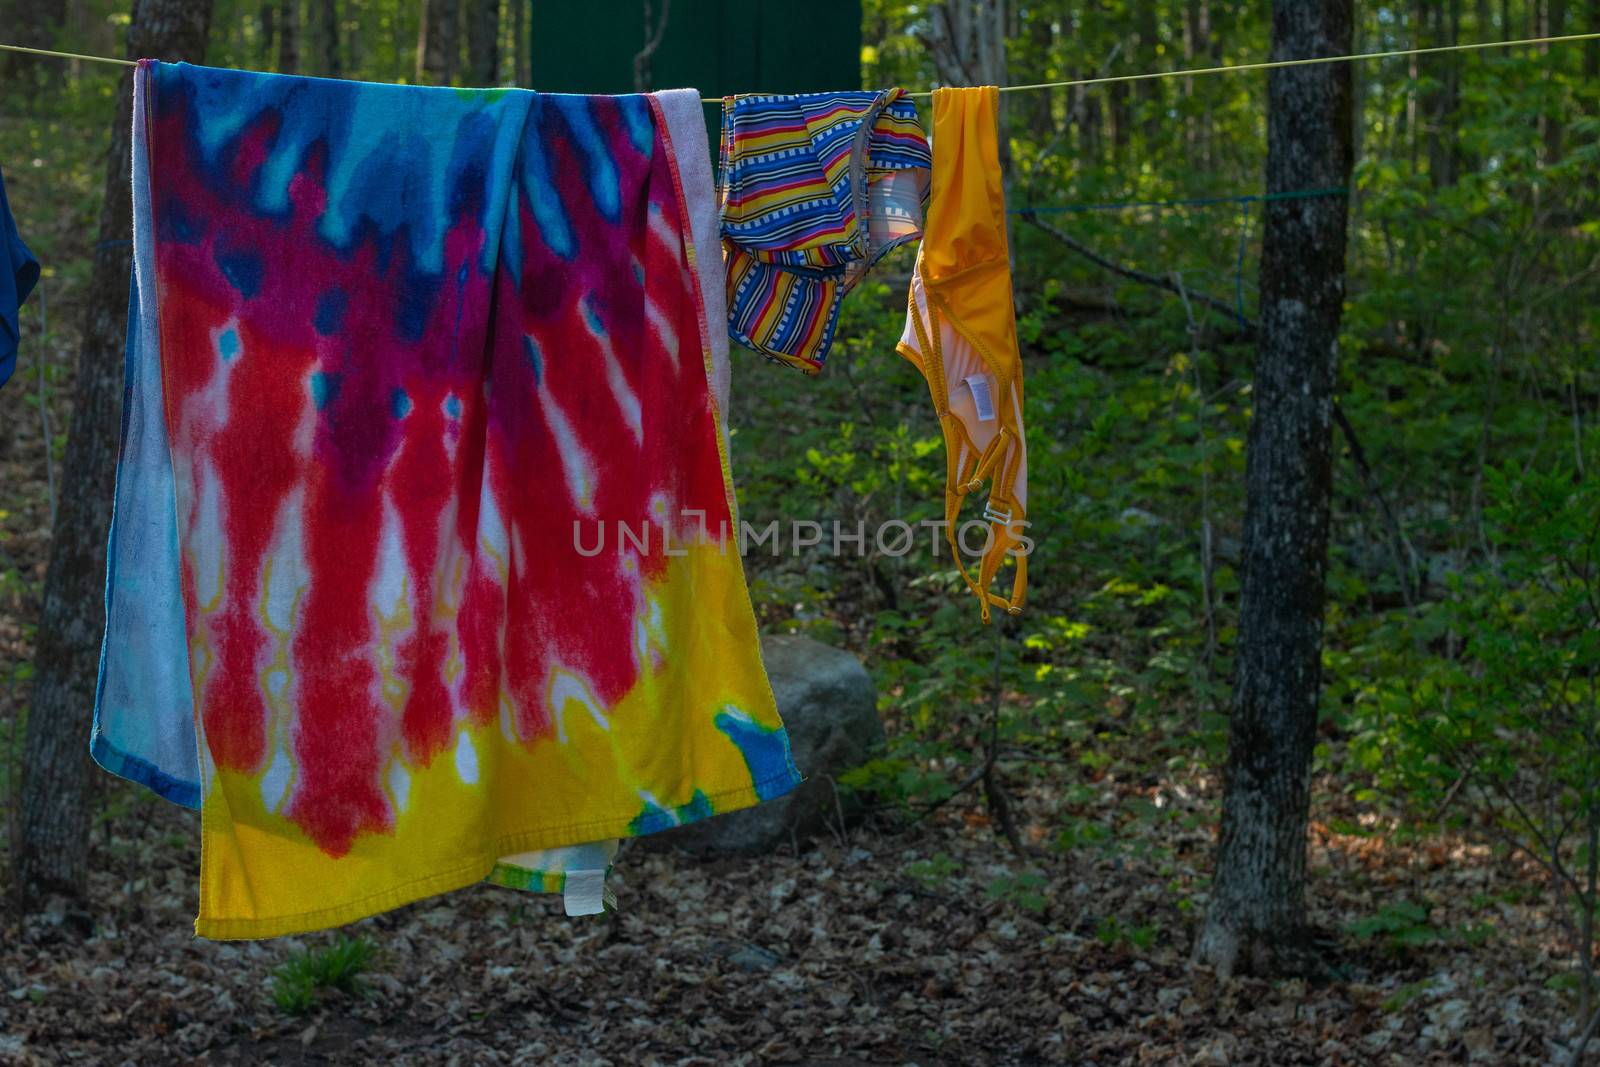 clothes are dried at the campground in nature.